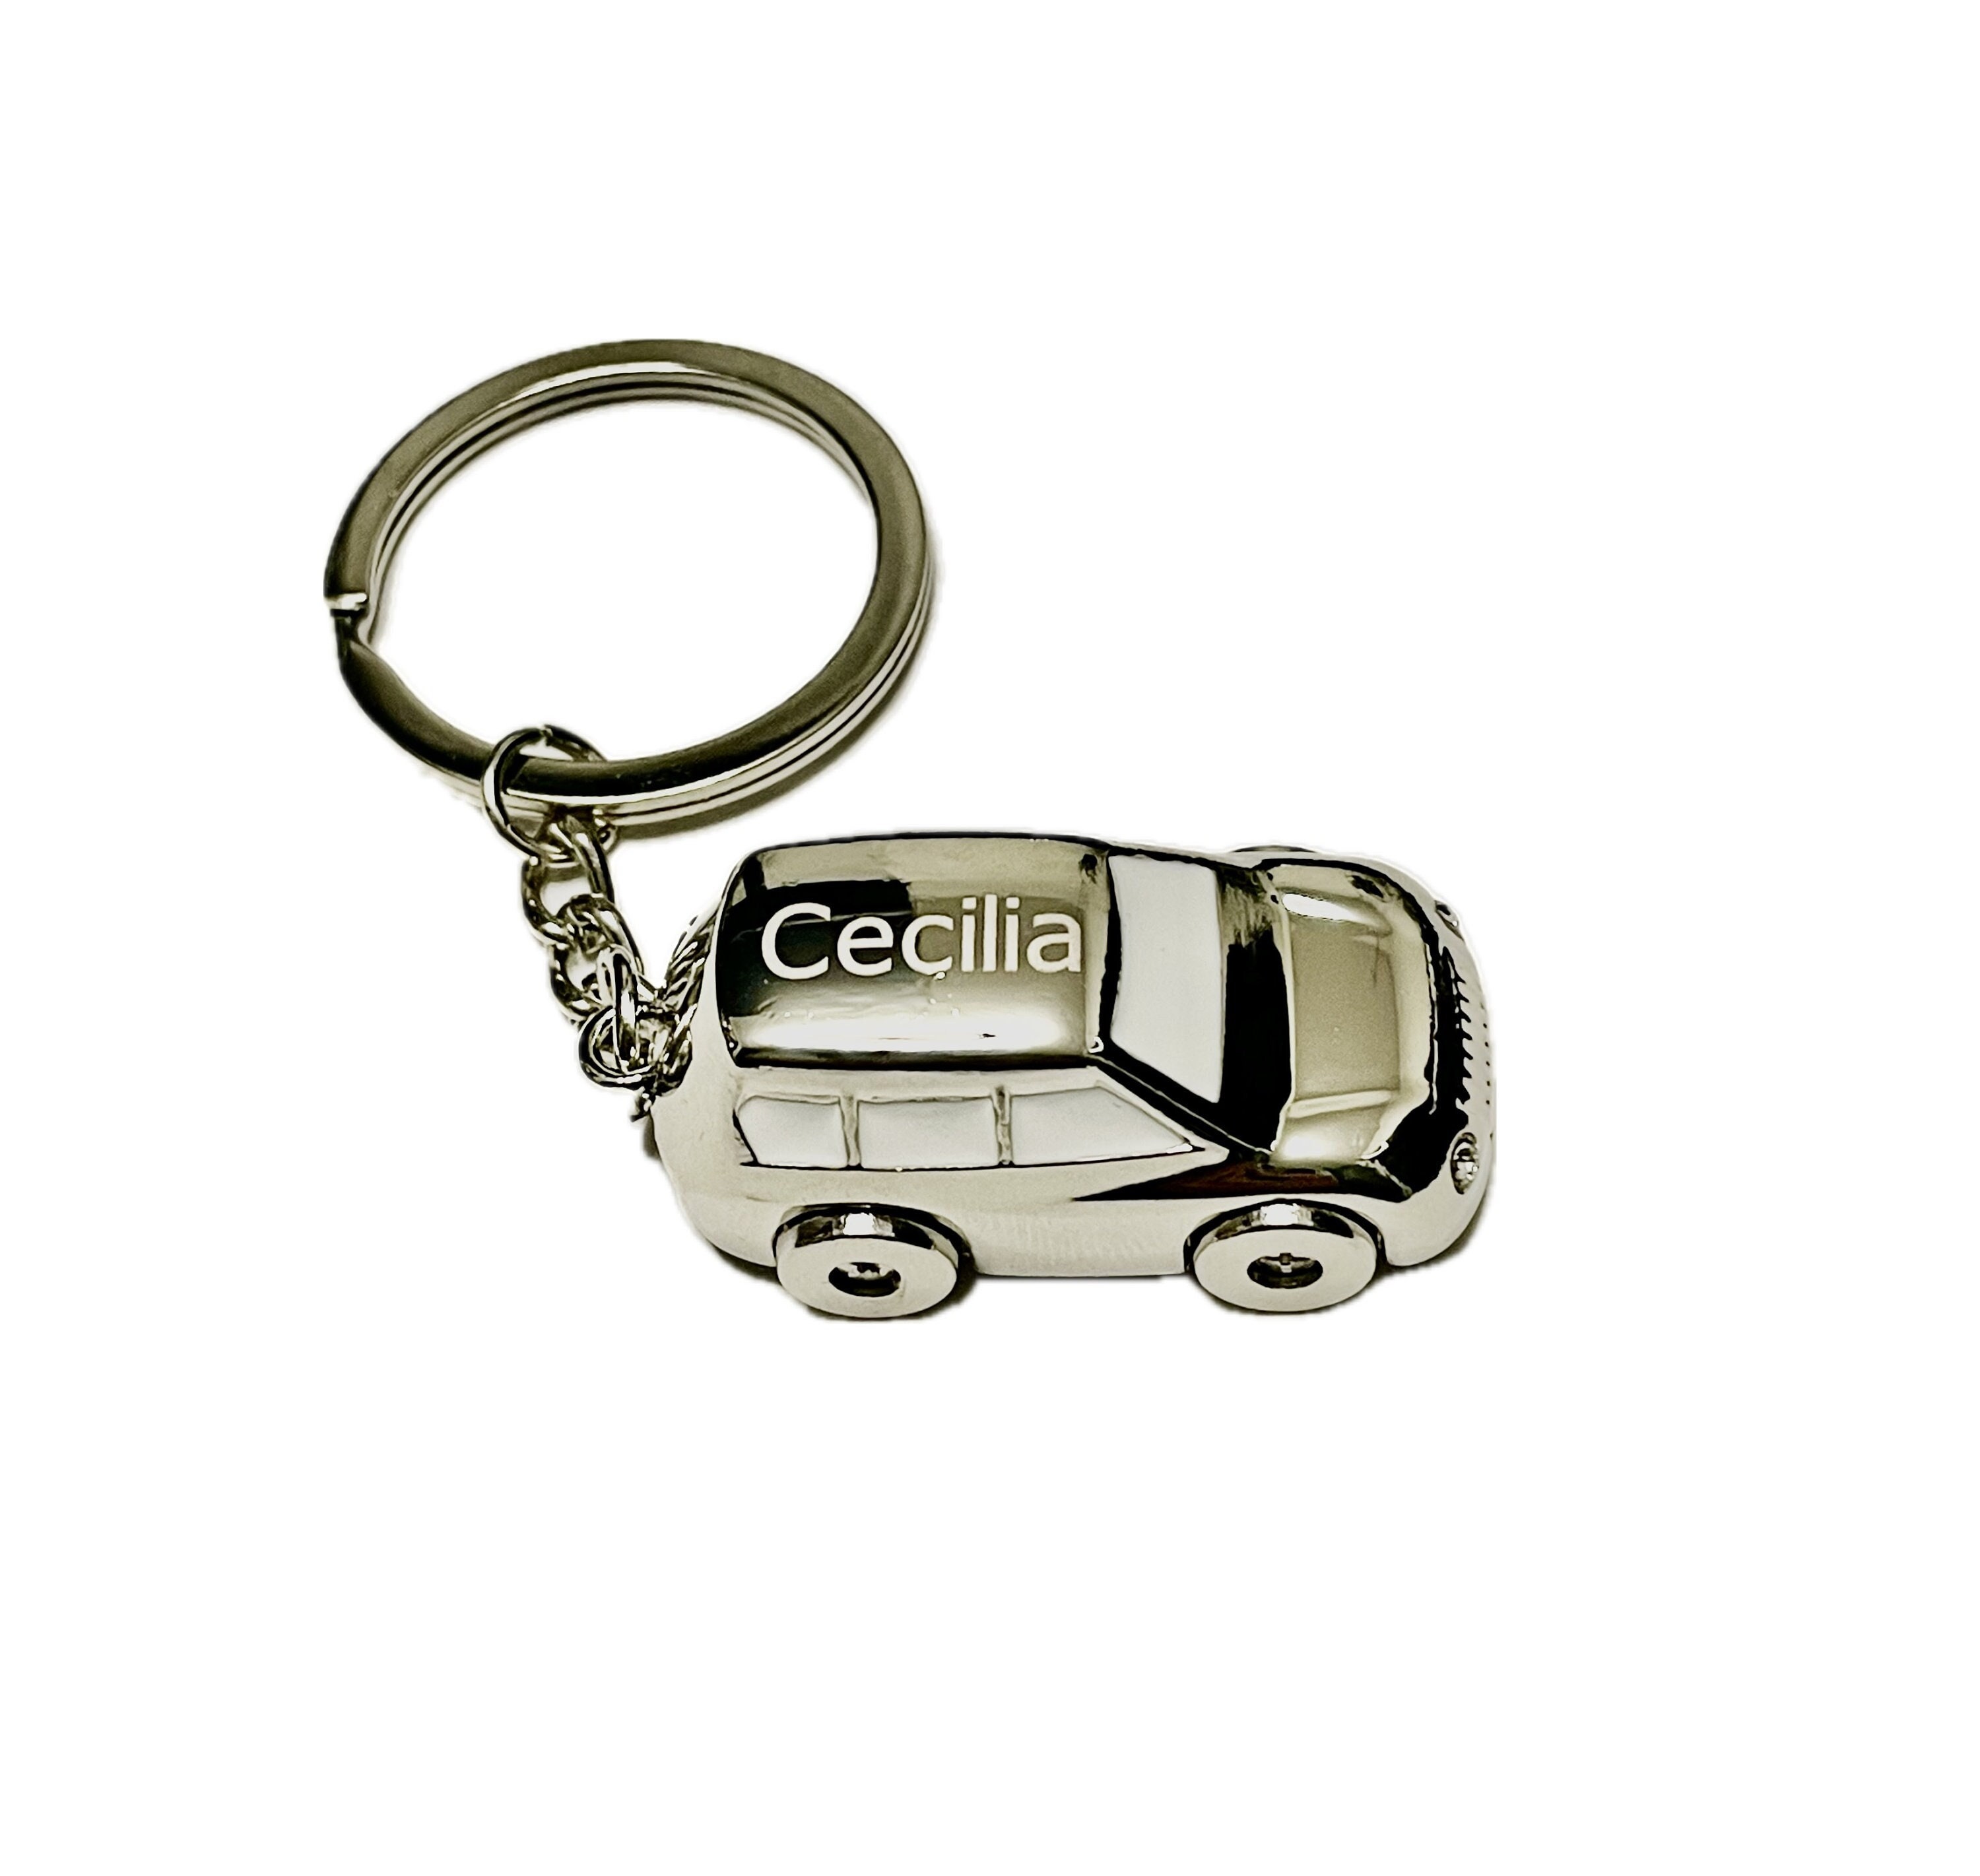 Get It Girl Rearview Mirror Charm, Female Empowerment Gift Ideas